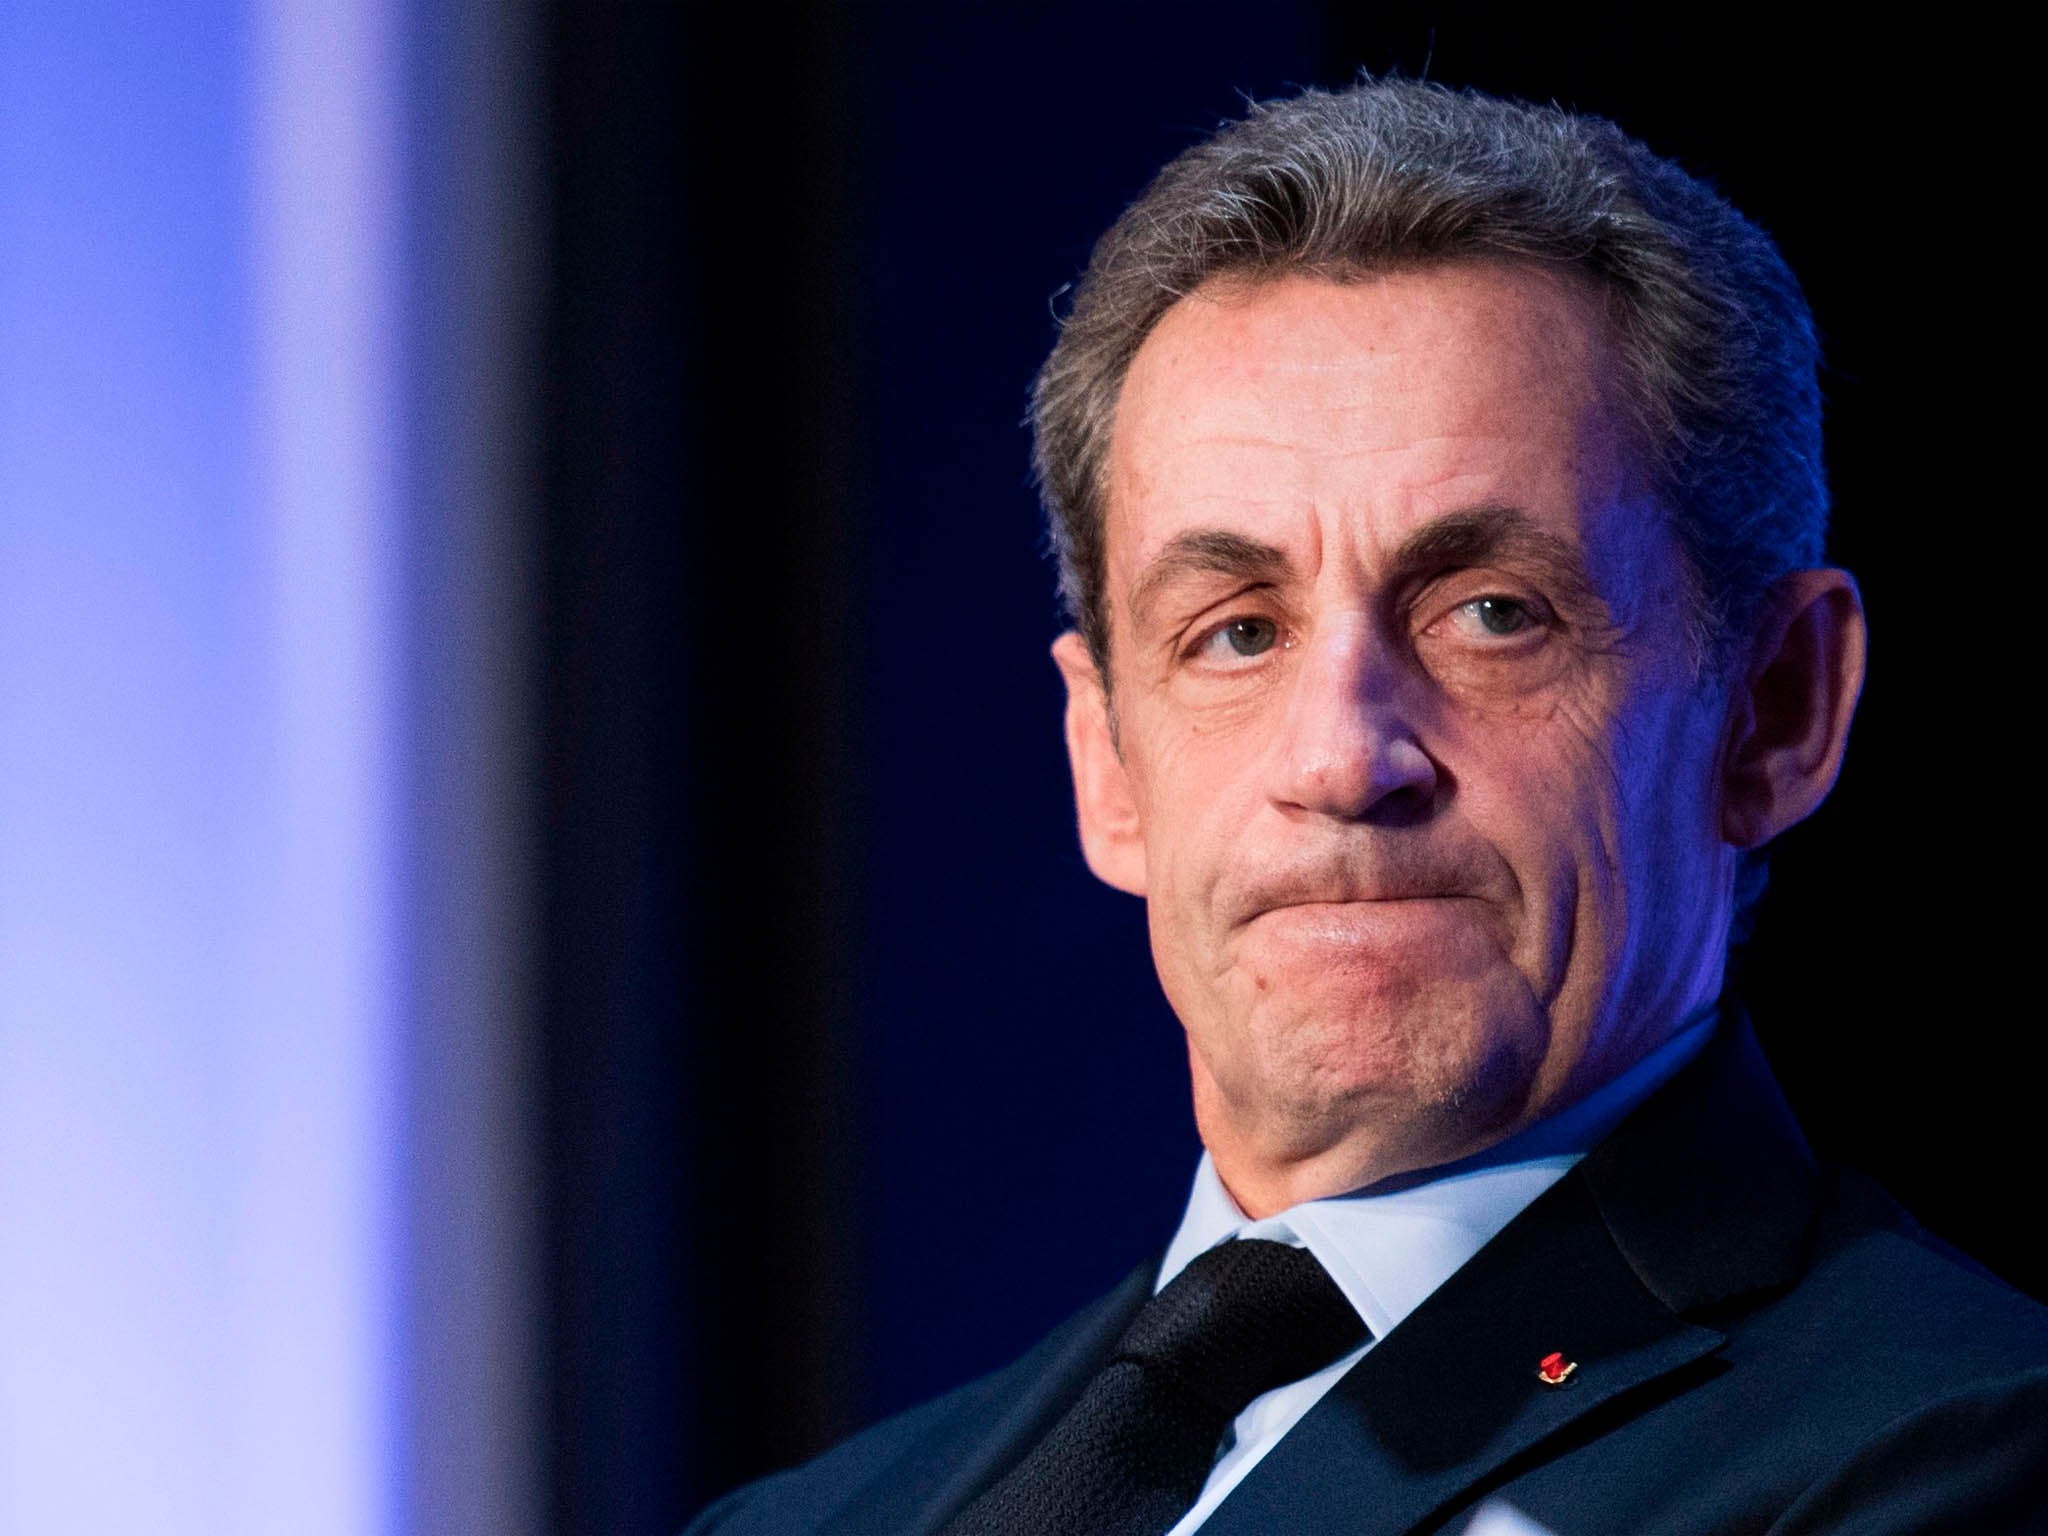 Sarkozy has now been indicted for “conspiracy”over alleged Libyan financing of this campaign